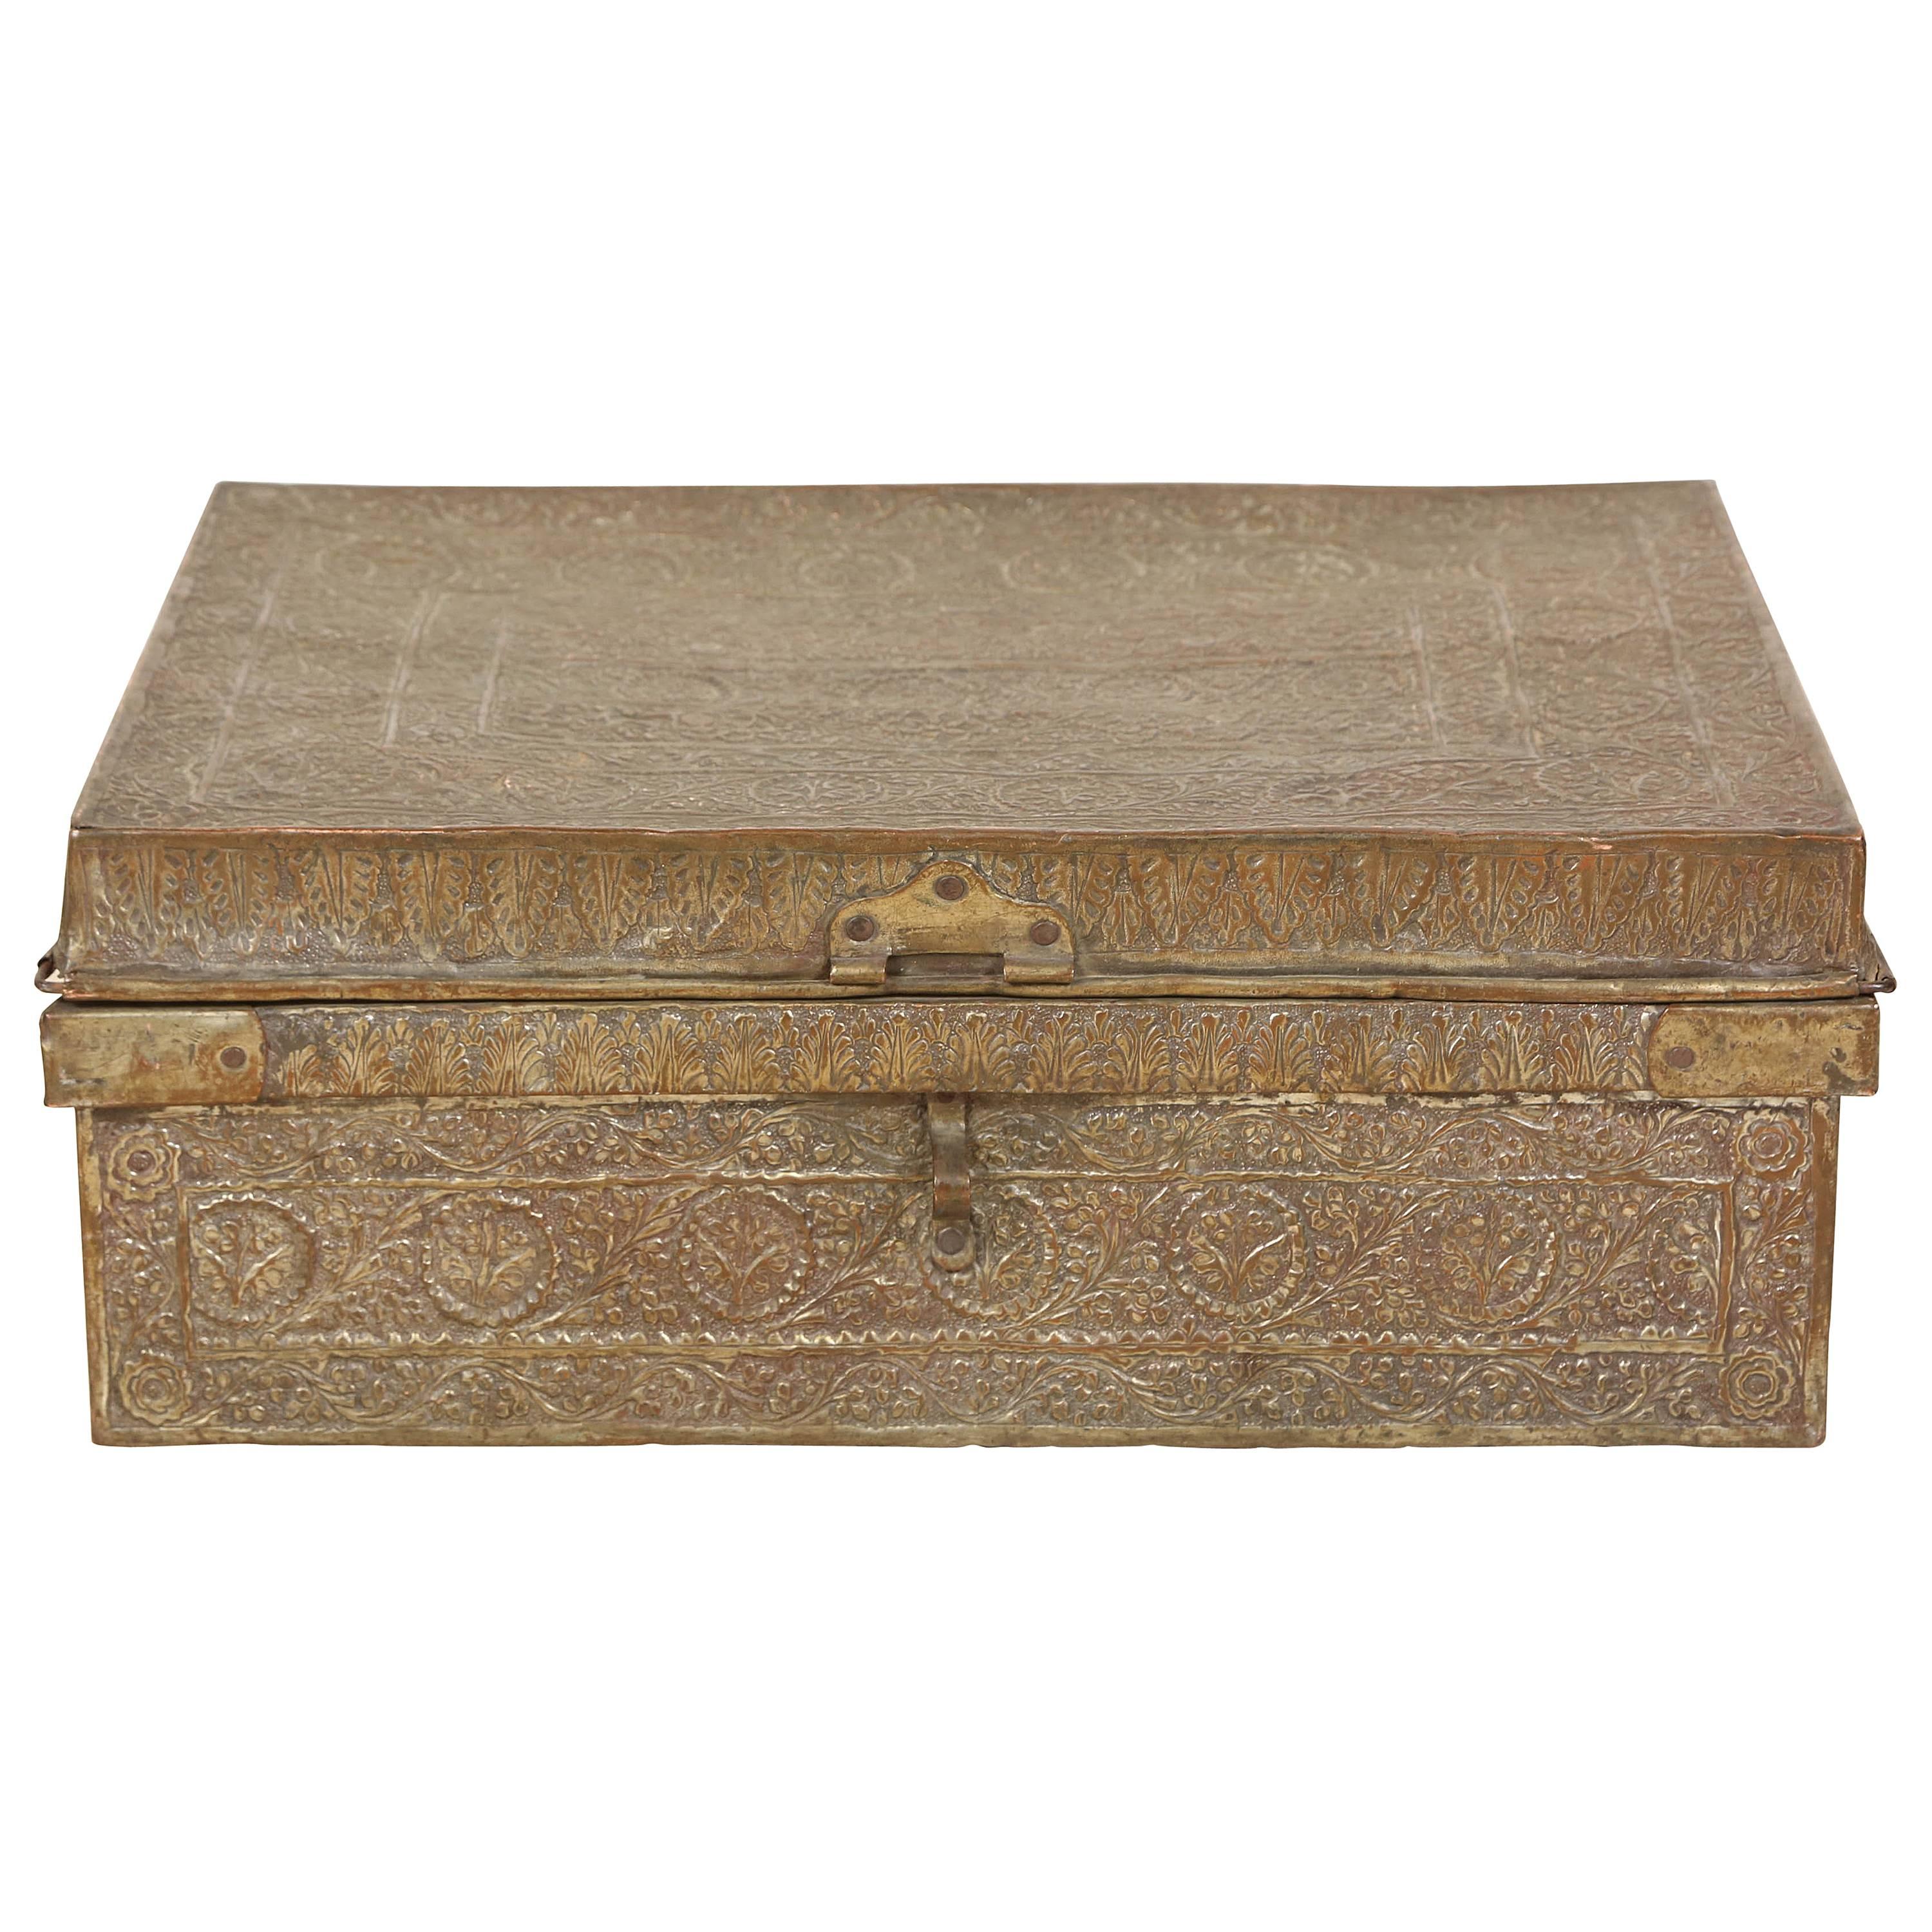 Large Antique 19th C. Anglo Indian Metal Writing Box